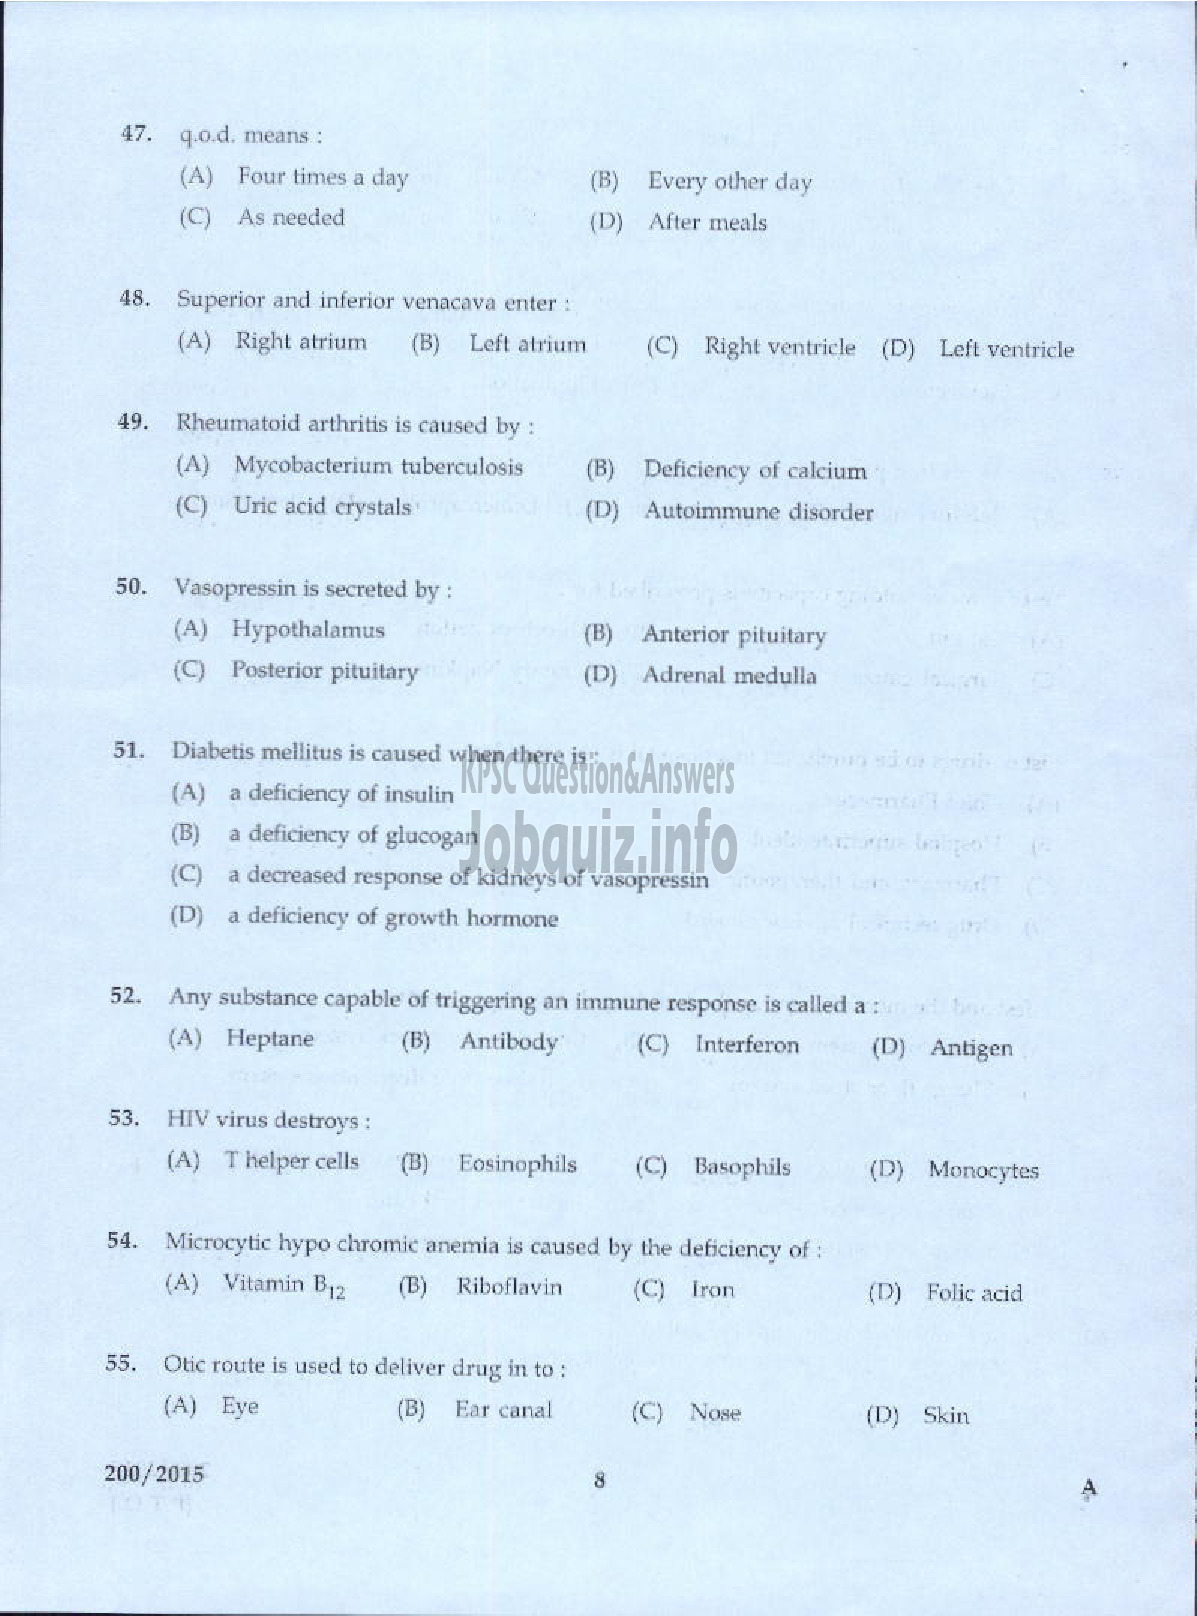 Kerala PSC Question Paper - PHARMACIST GR II HEALTH SERVICES-6